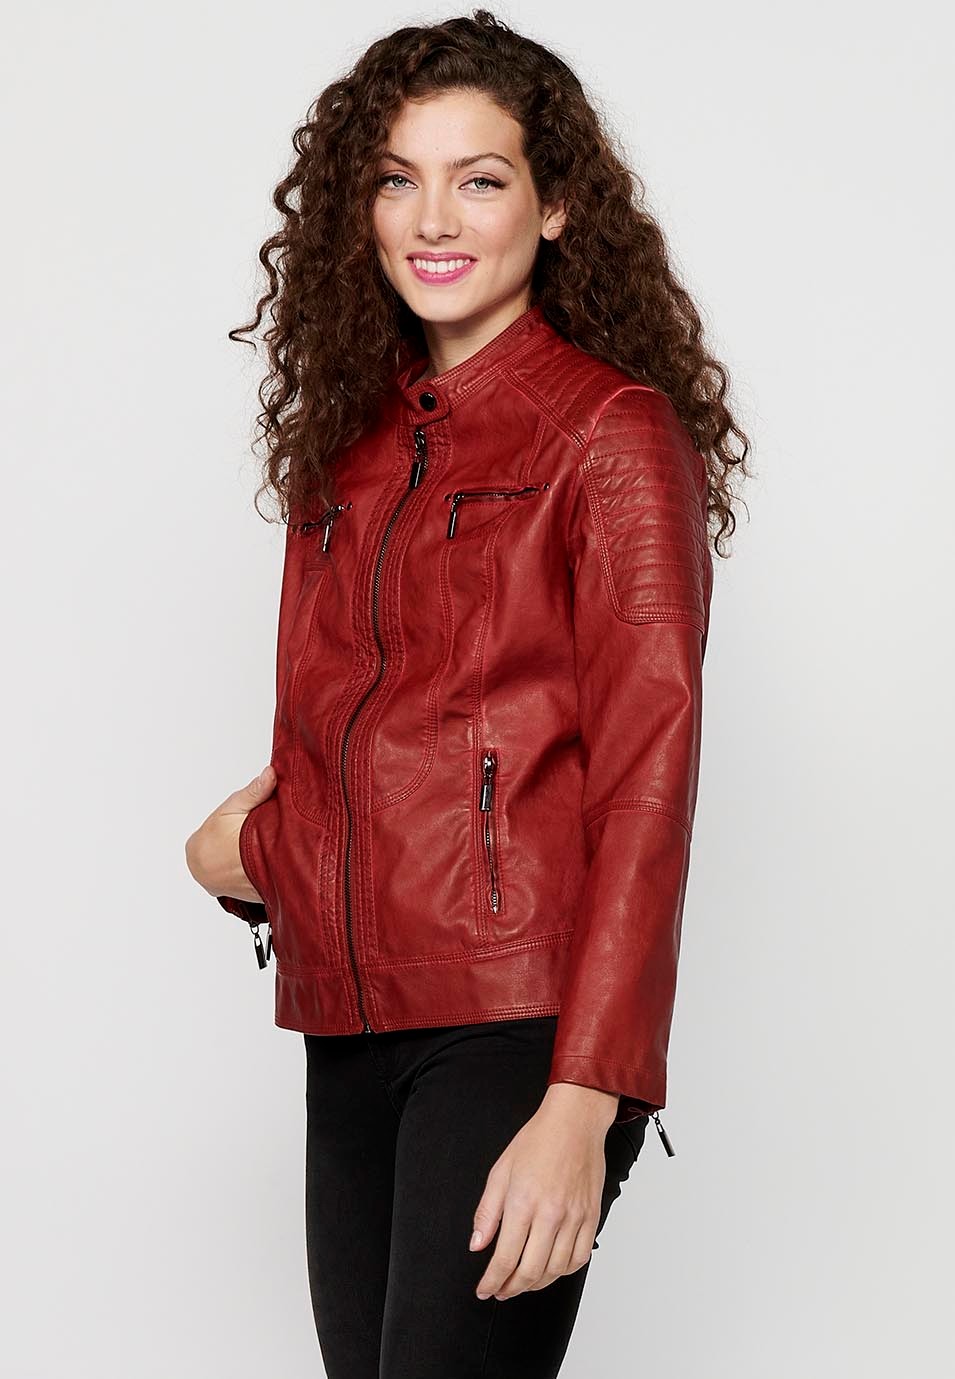 Women's Red Long Sleeve Round Neck Zipper Front Closure Jacket 1